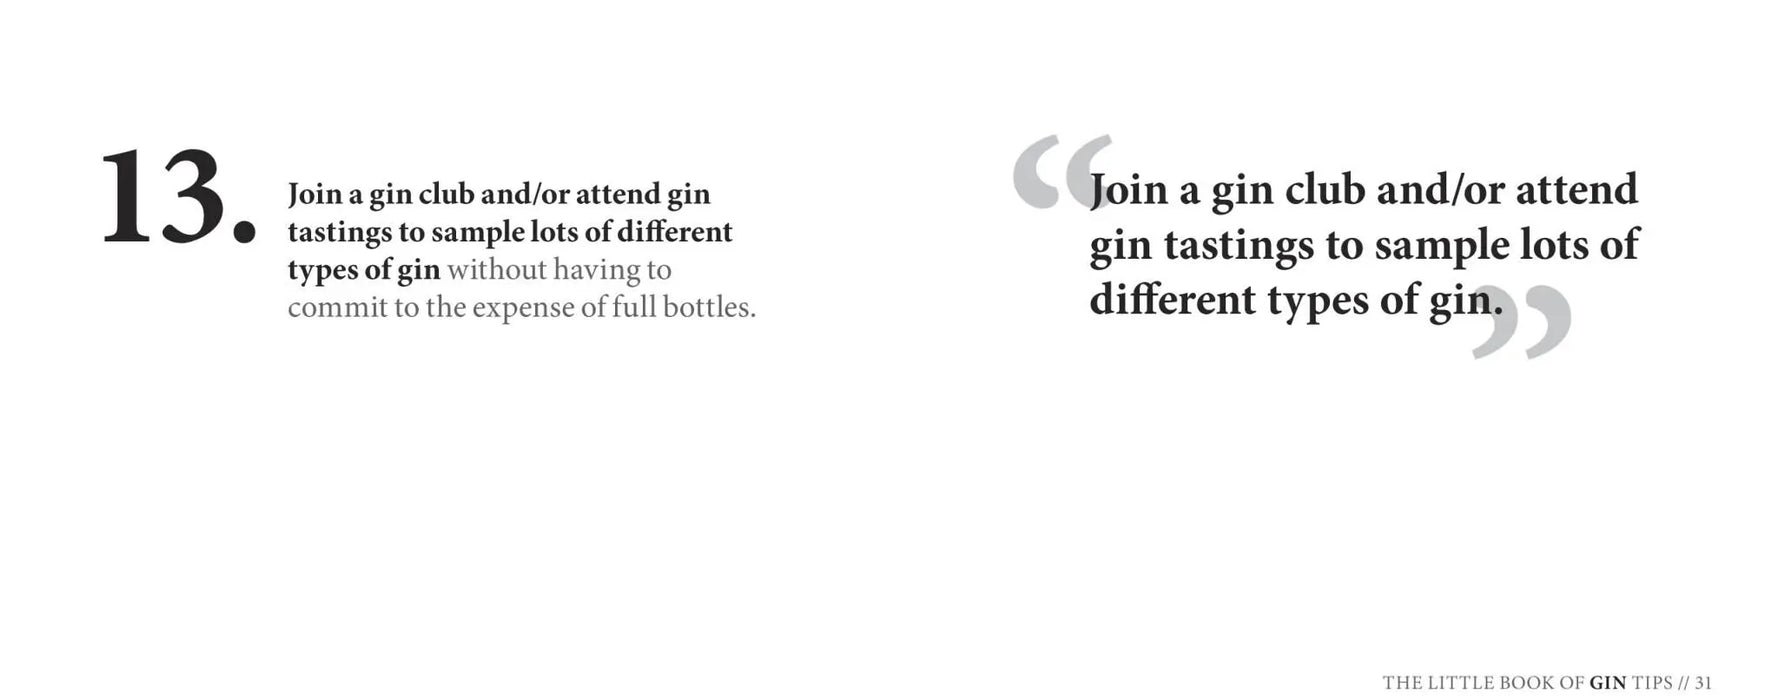 The Little Book Of Gin Tips